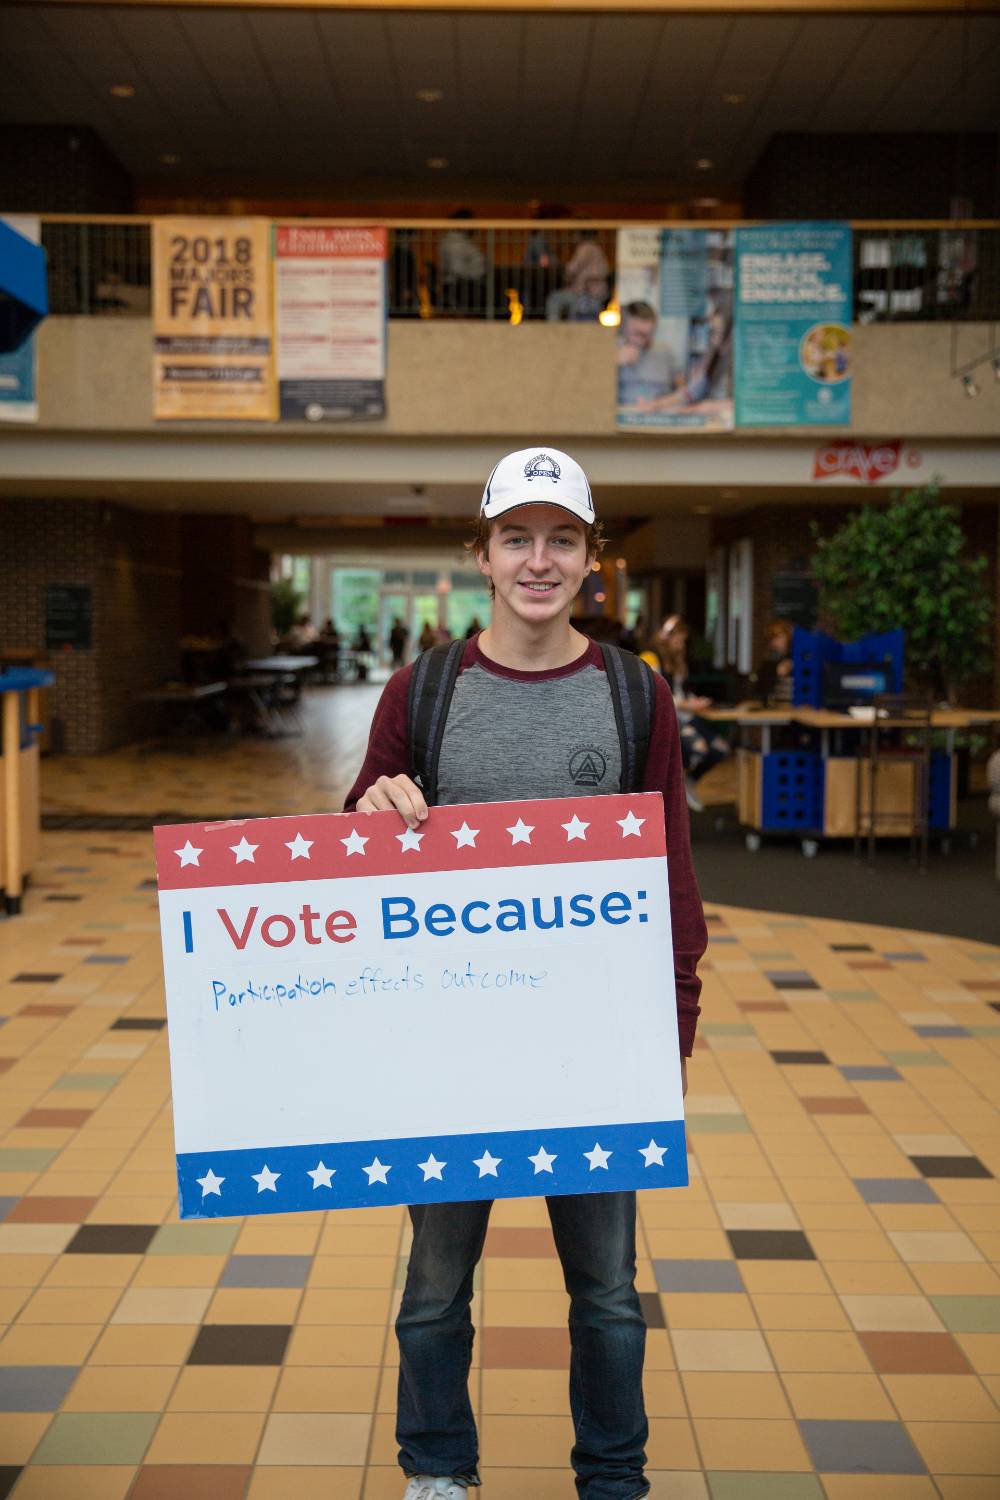 Student holding sign titled "I vote because: Participation effects outcome"